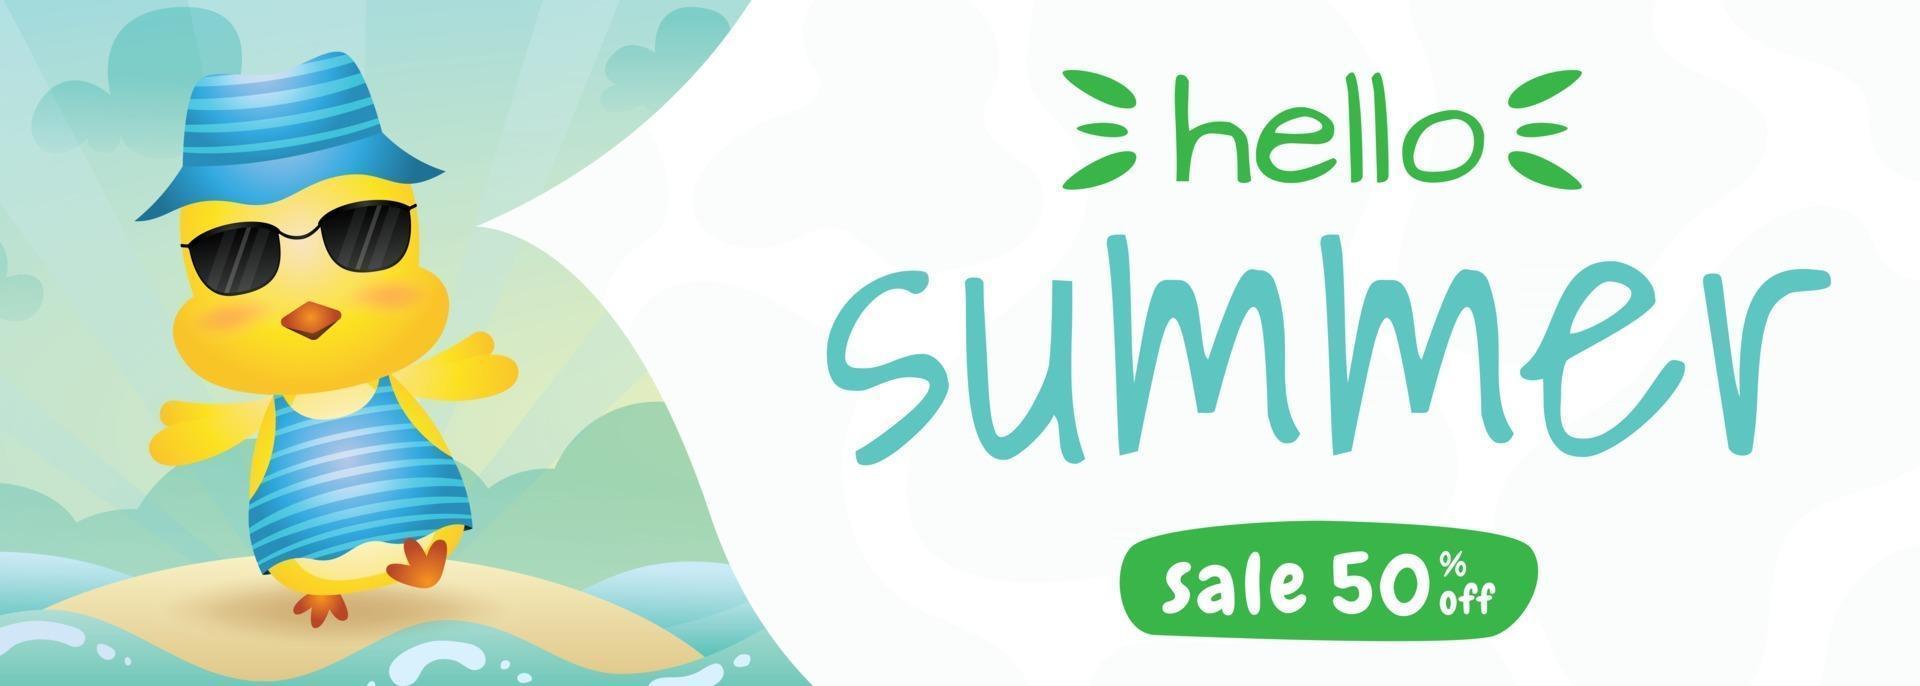 summer sale banner with a cute chick using summer costume vector